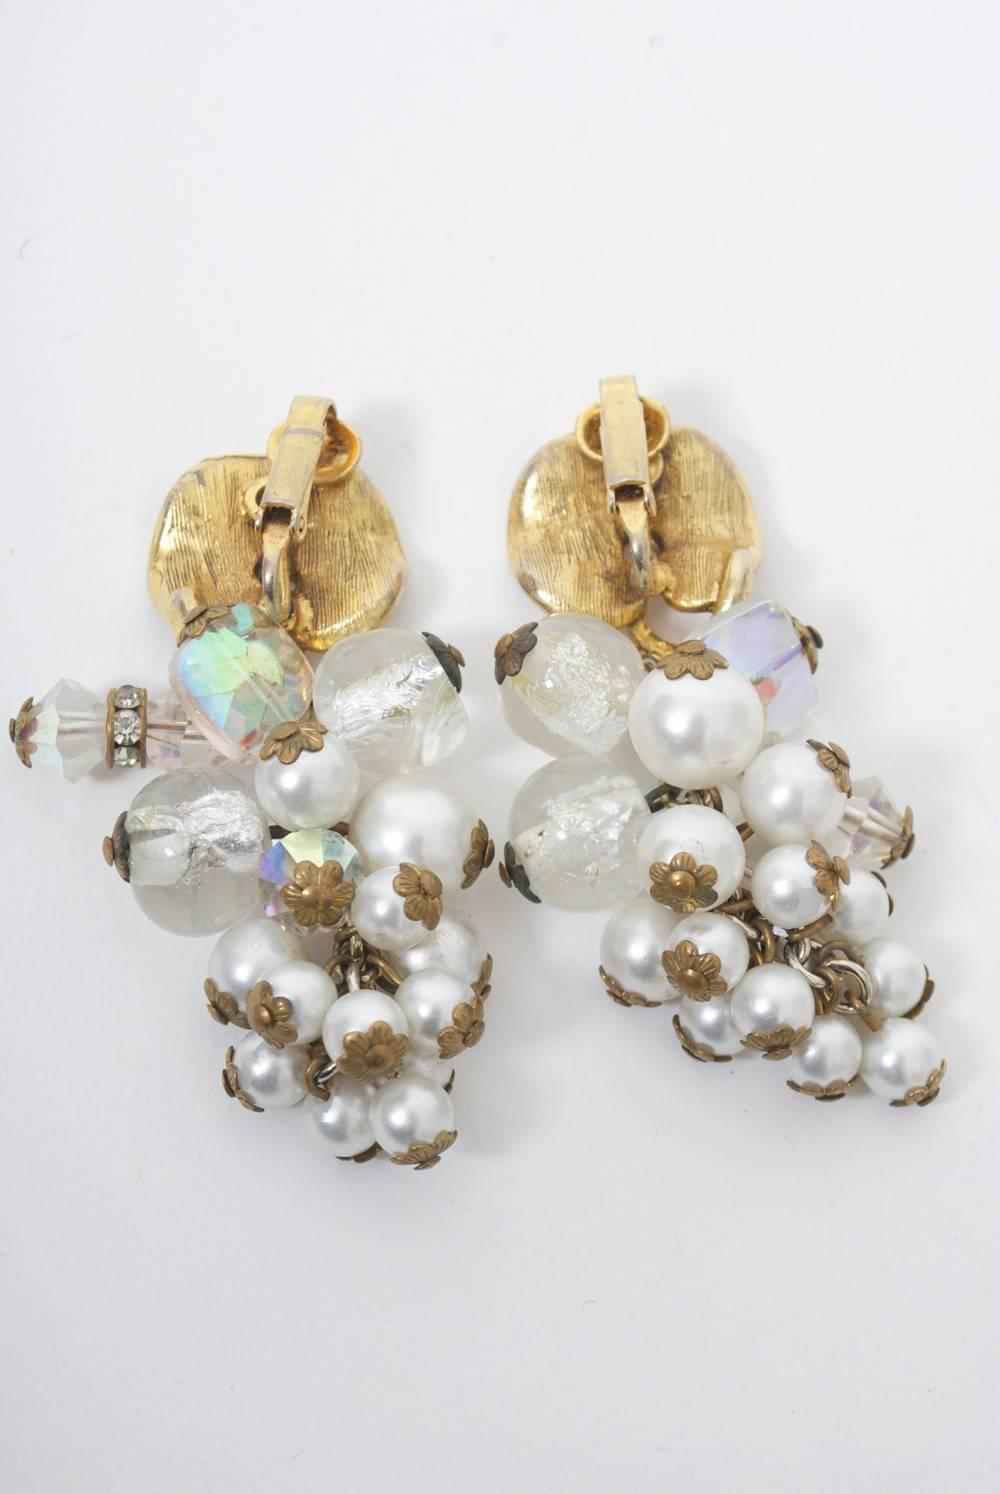 Vintage clip-on earrings composed of a cascade of small pearls, which forms a cluster of grapes that is suspended from a gold metal leaf-form earpiece Additional crystal beads enrich the top of the cluster. Unsigned, but very well executed, and look